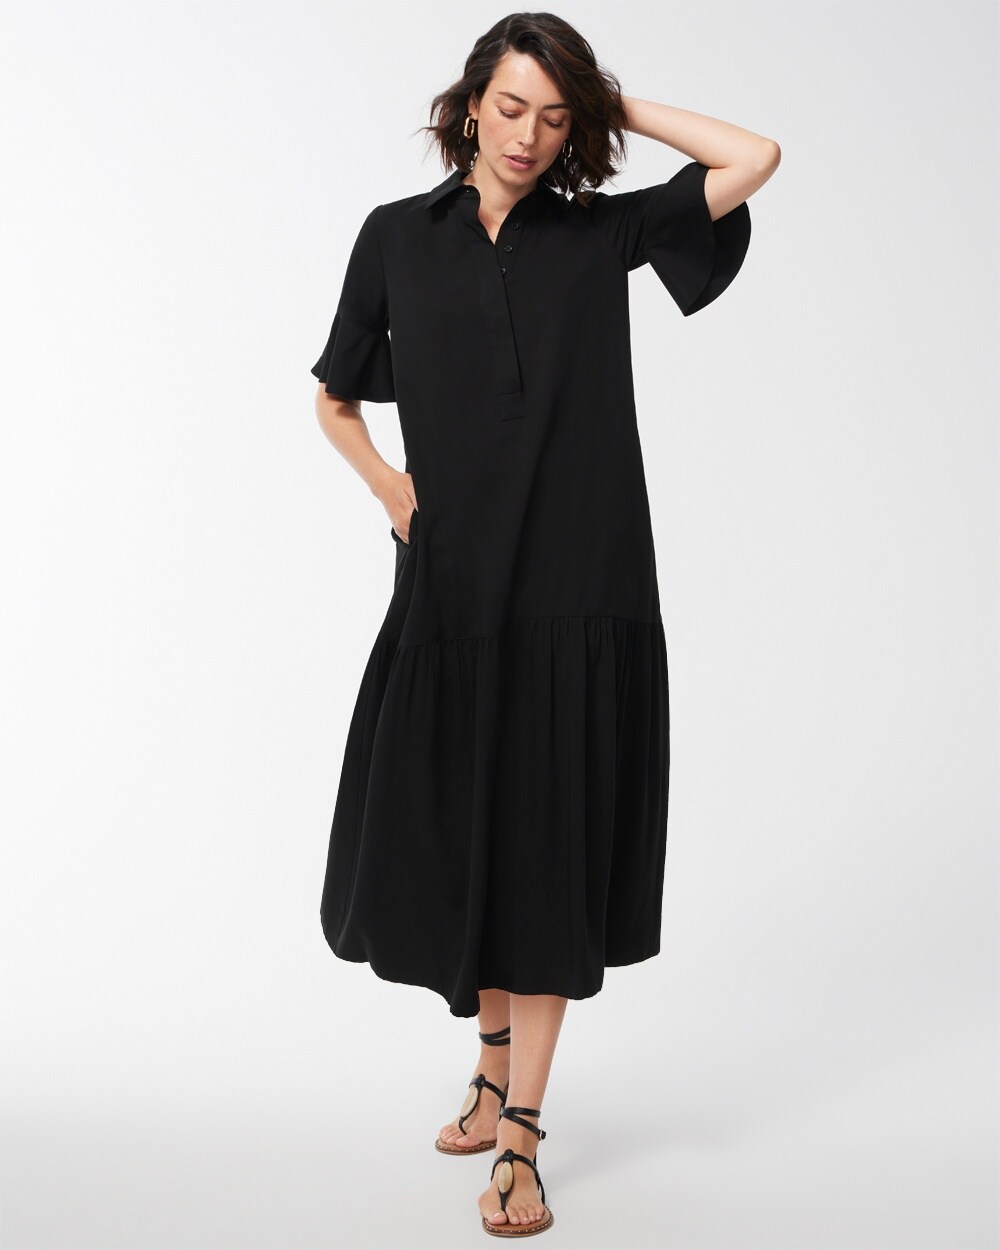 Flounce Sleeve Midi Dress video preview image, click to start video